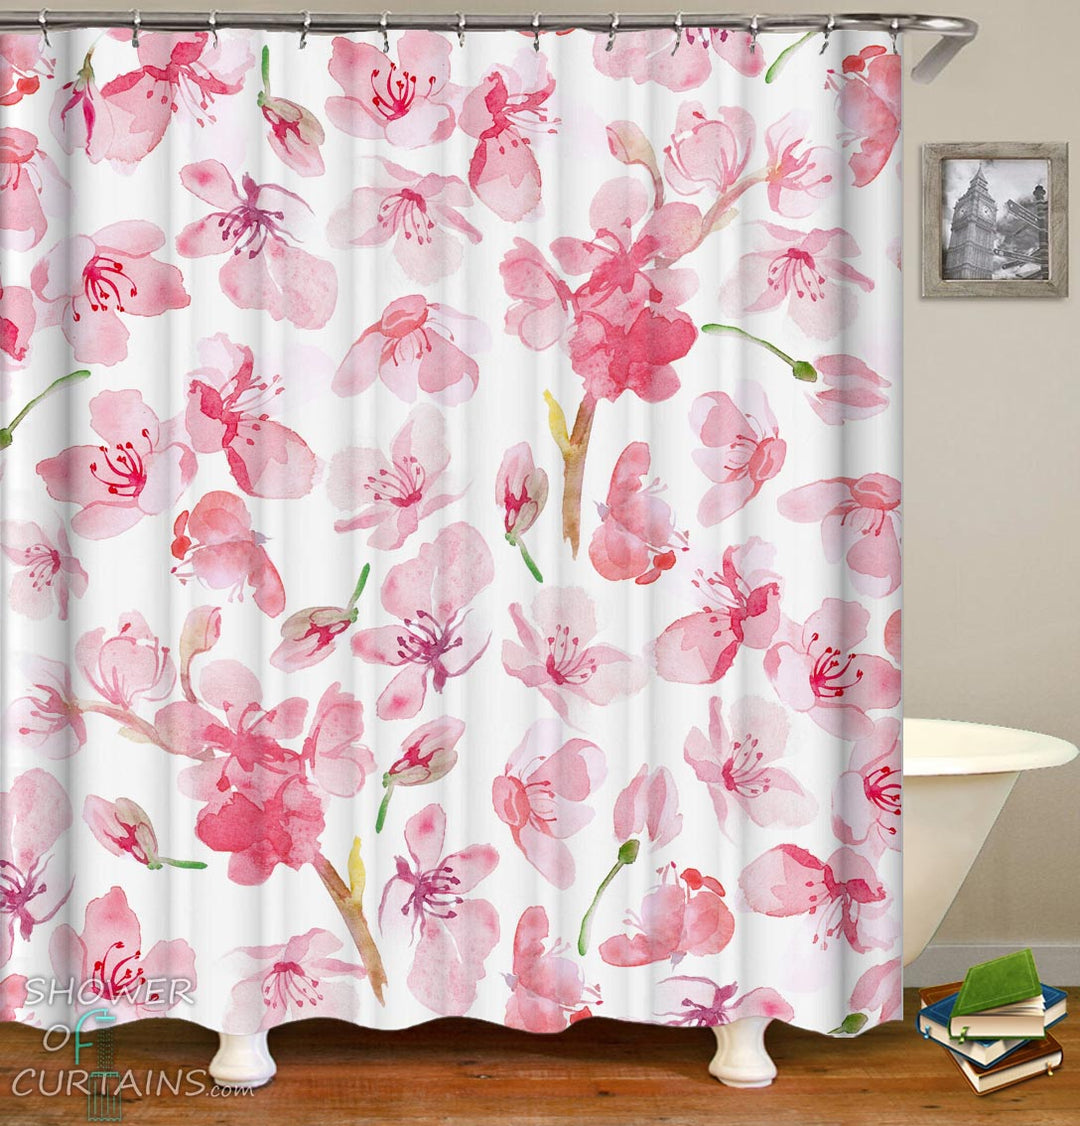 Watercolor Pink Flowers Shower Curtain - Floral Bathroom Decor